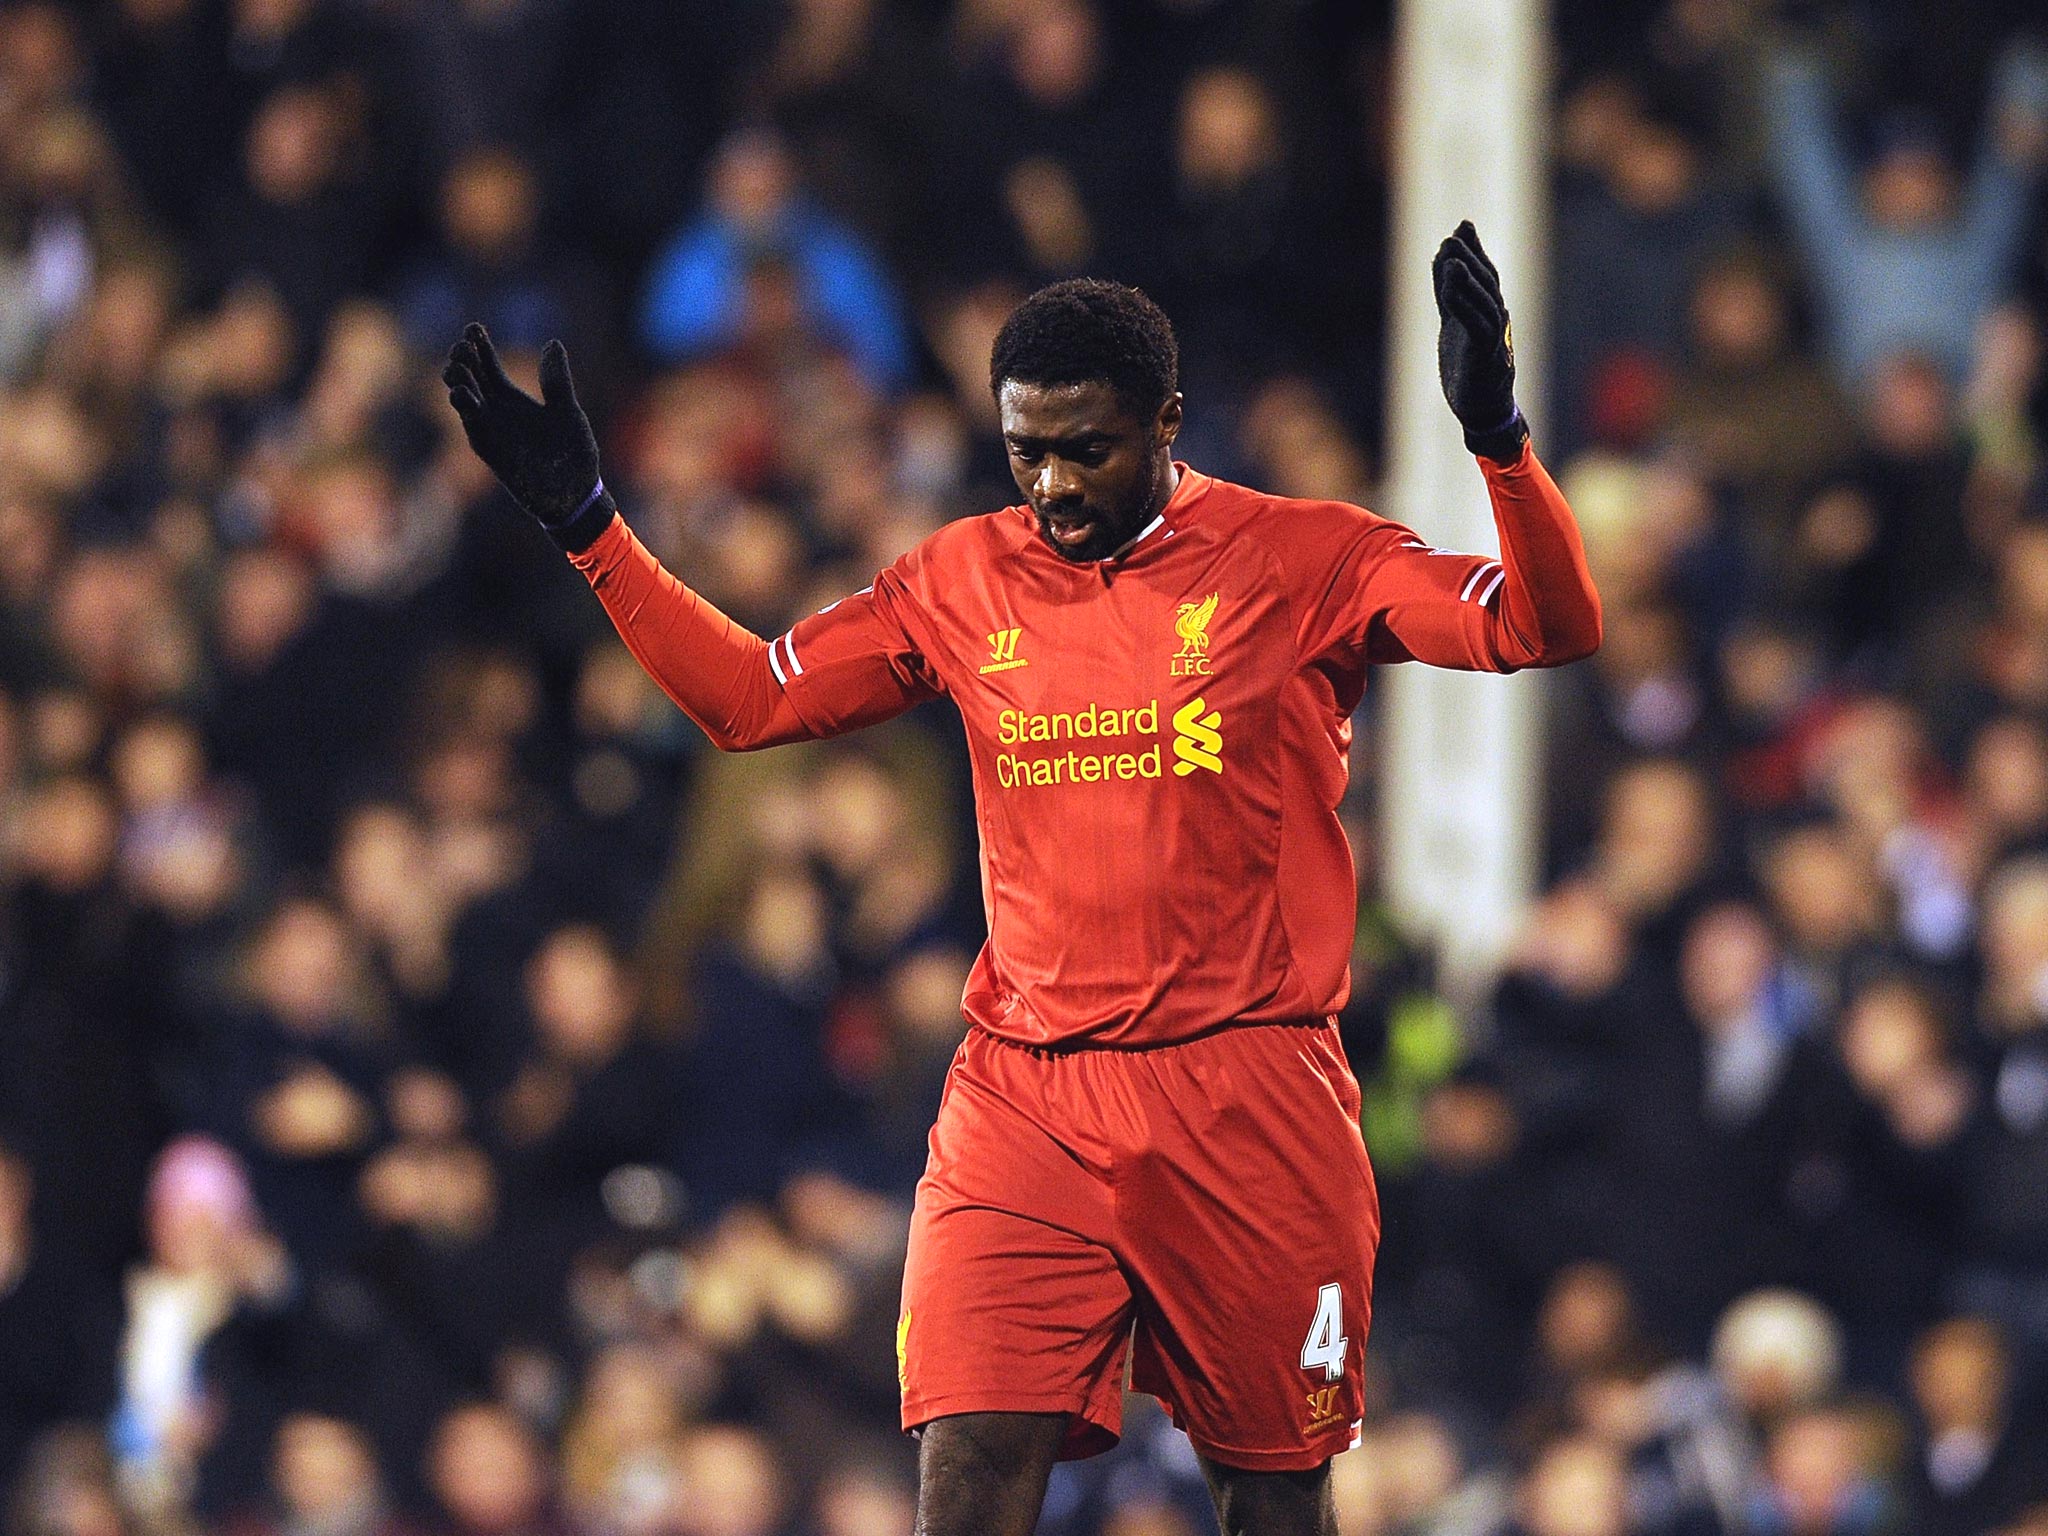 Liverpool escaped with a dramatic win at Fulham – despite Kolo Touré’s comical own goal